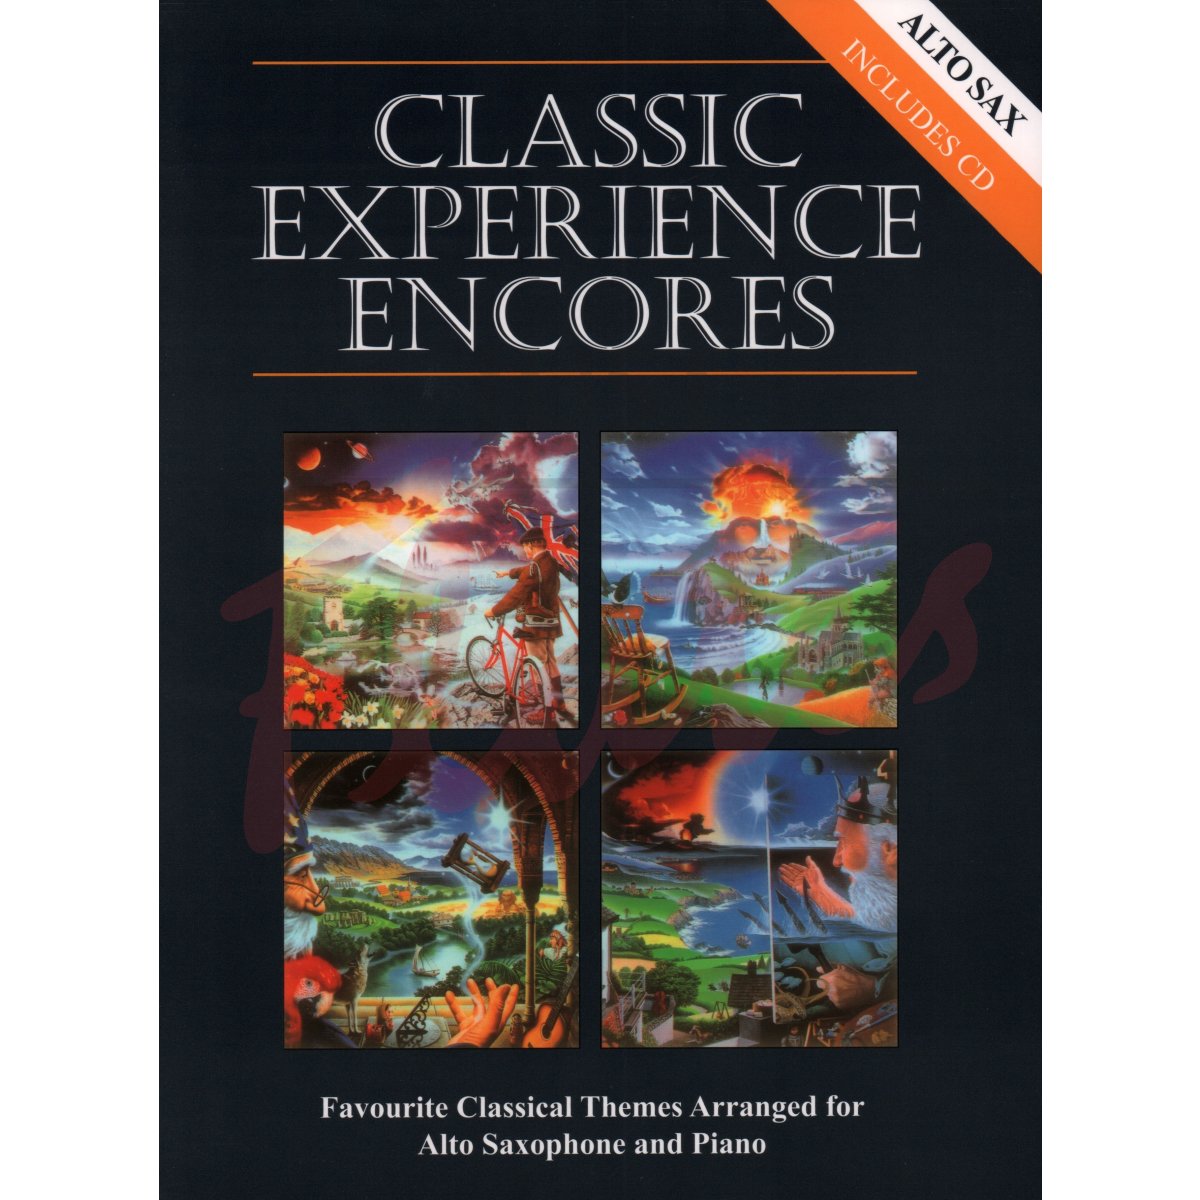 Classic Experience Encores for Alto Saxophone and Piano